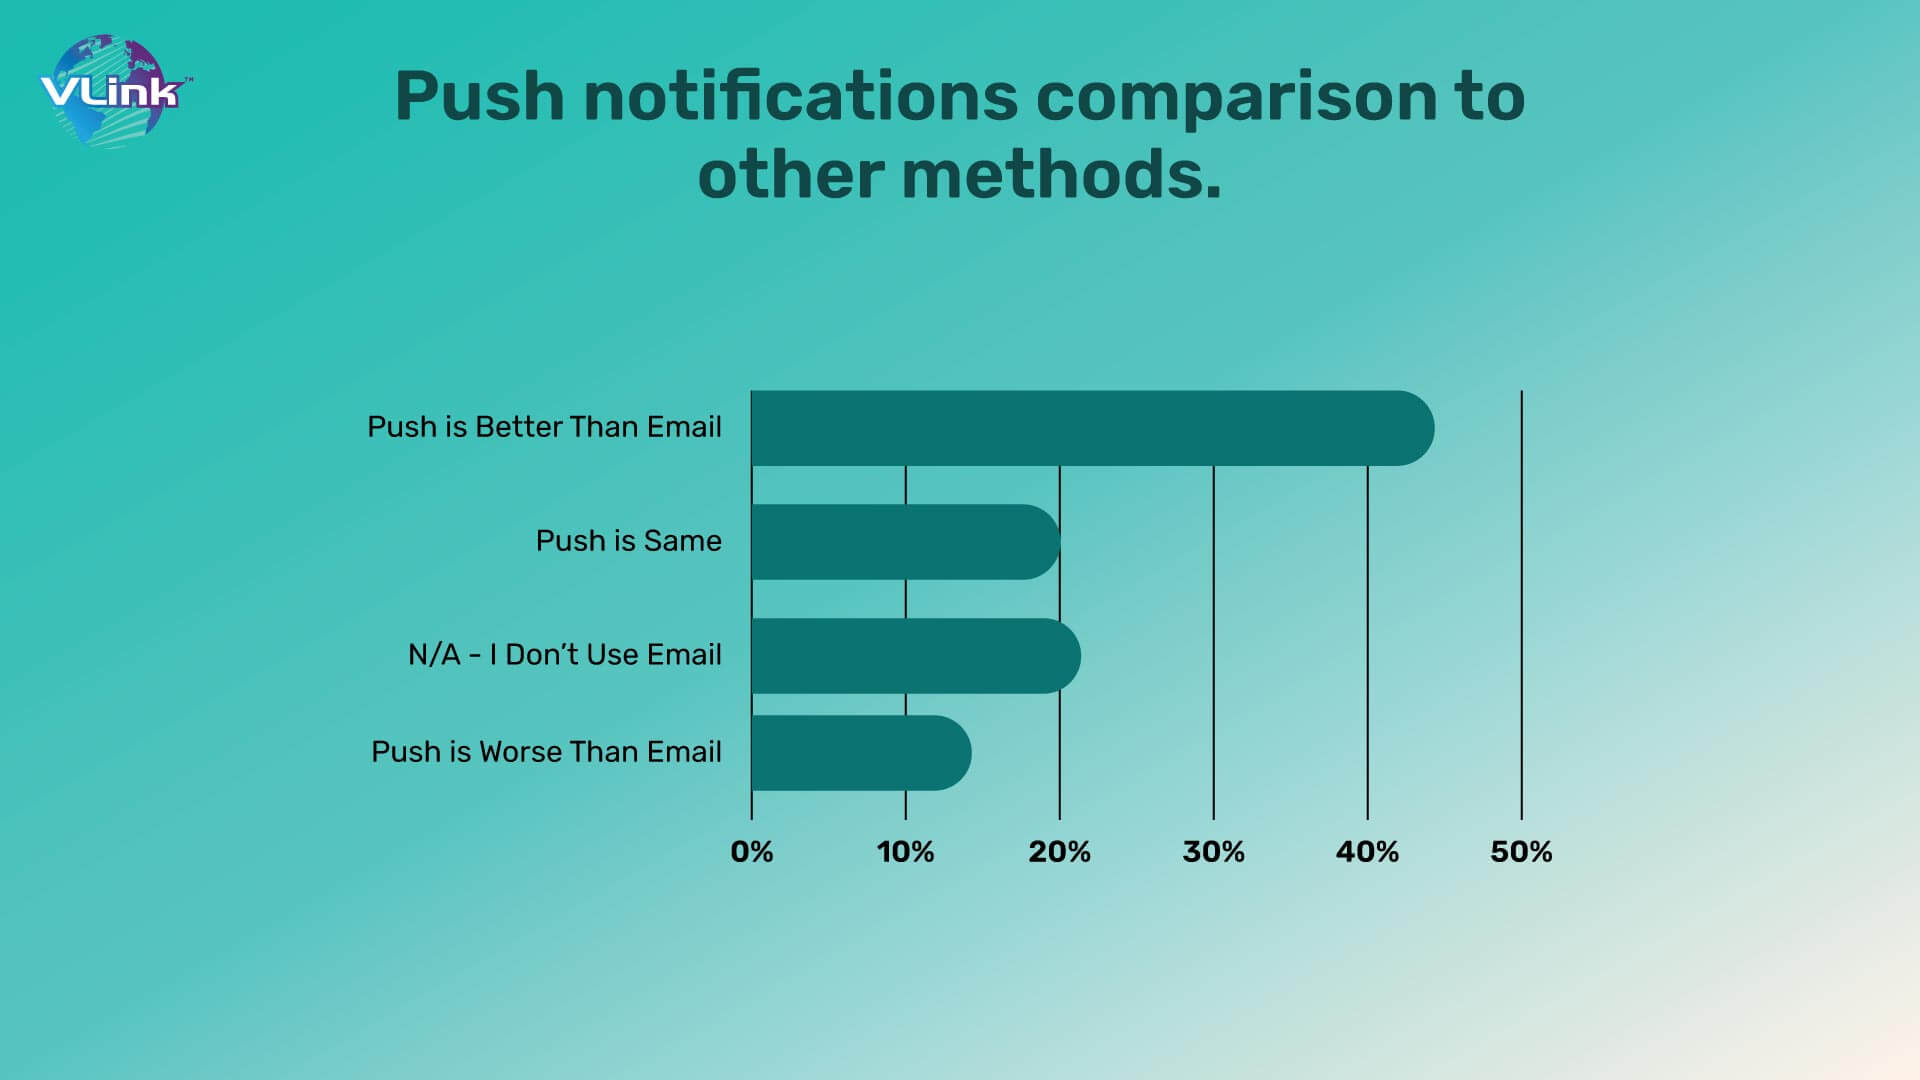 Push notifications comparison to other methods